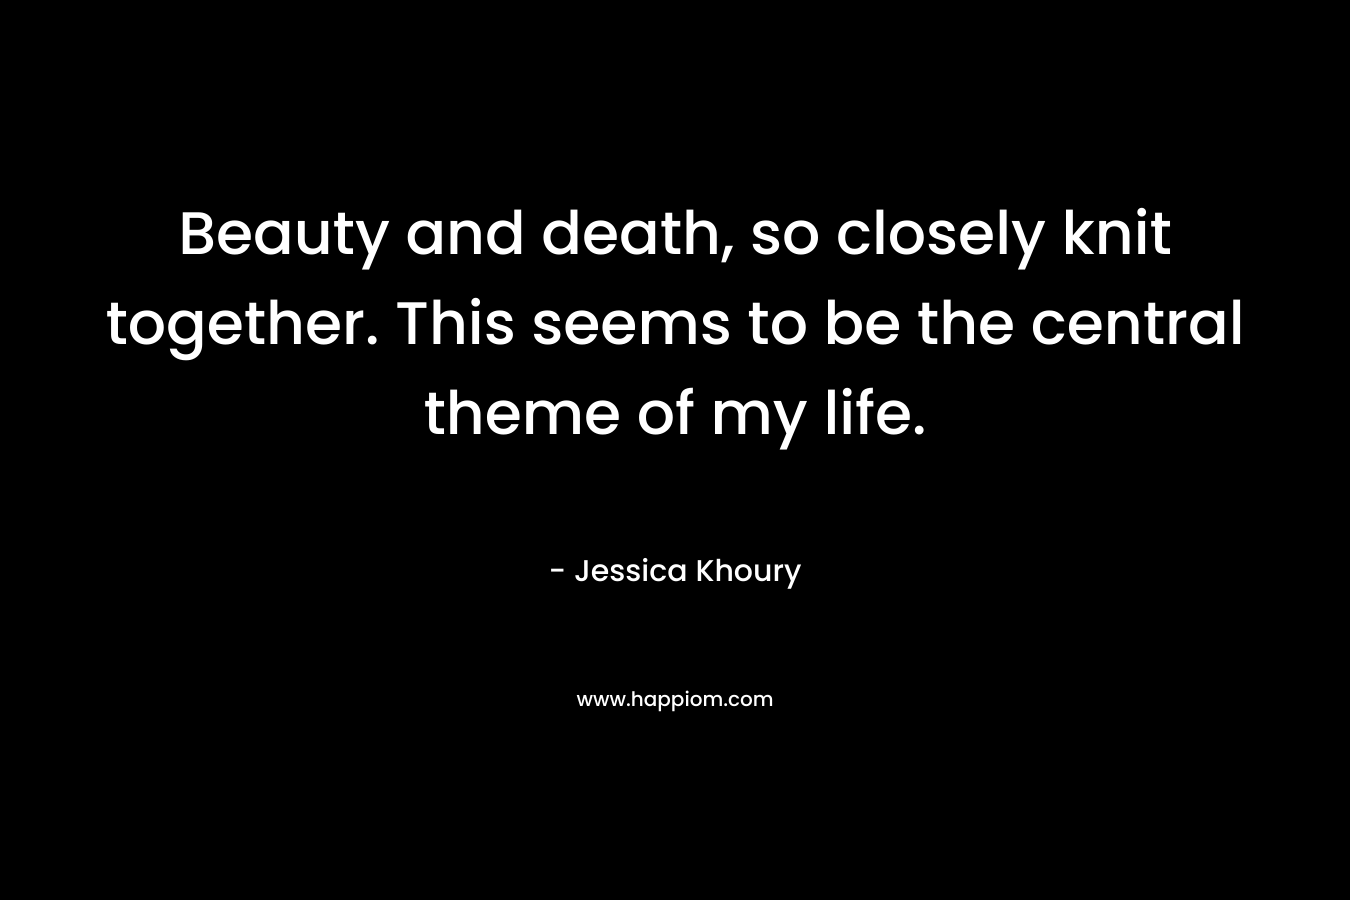 Beauty and death, so closely knit together. This seems to be the central theme of my life.